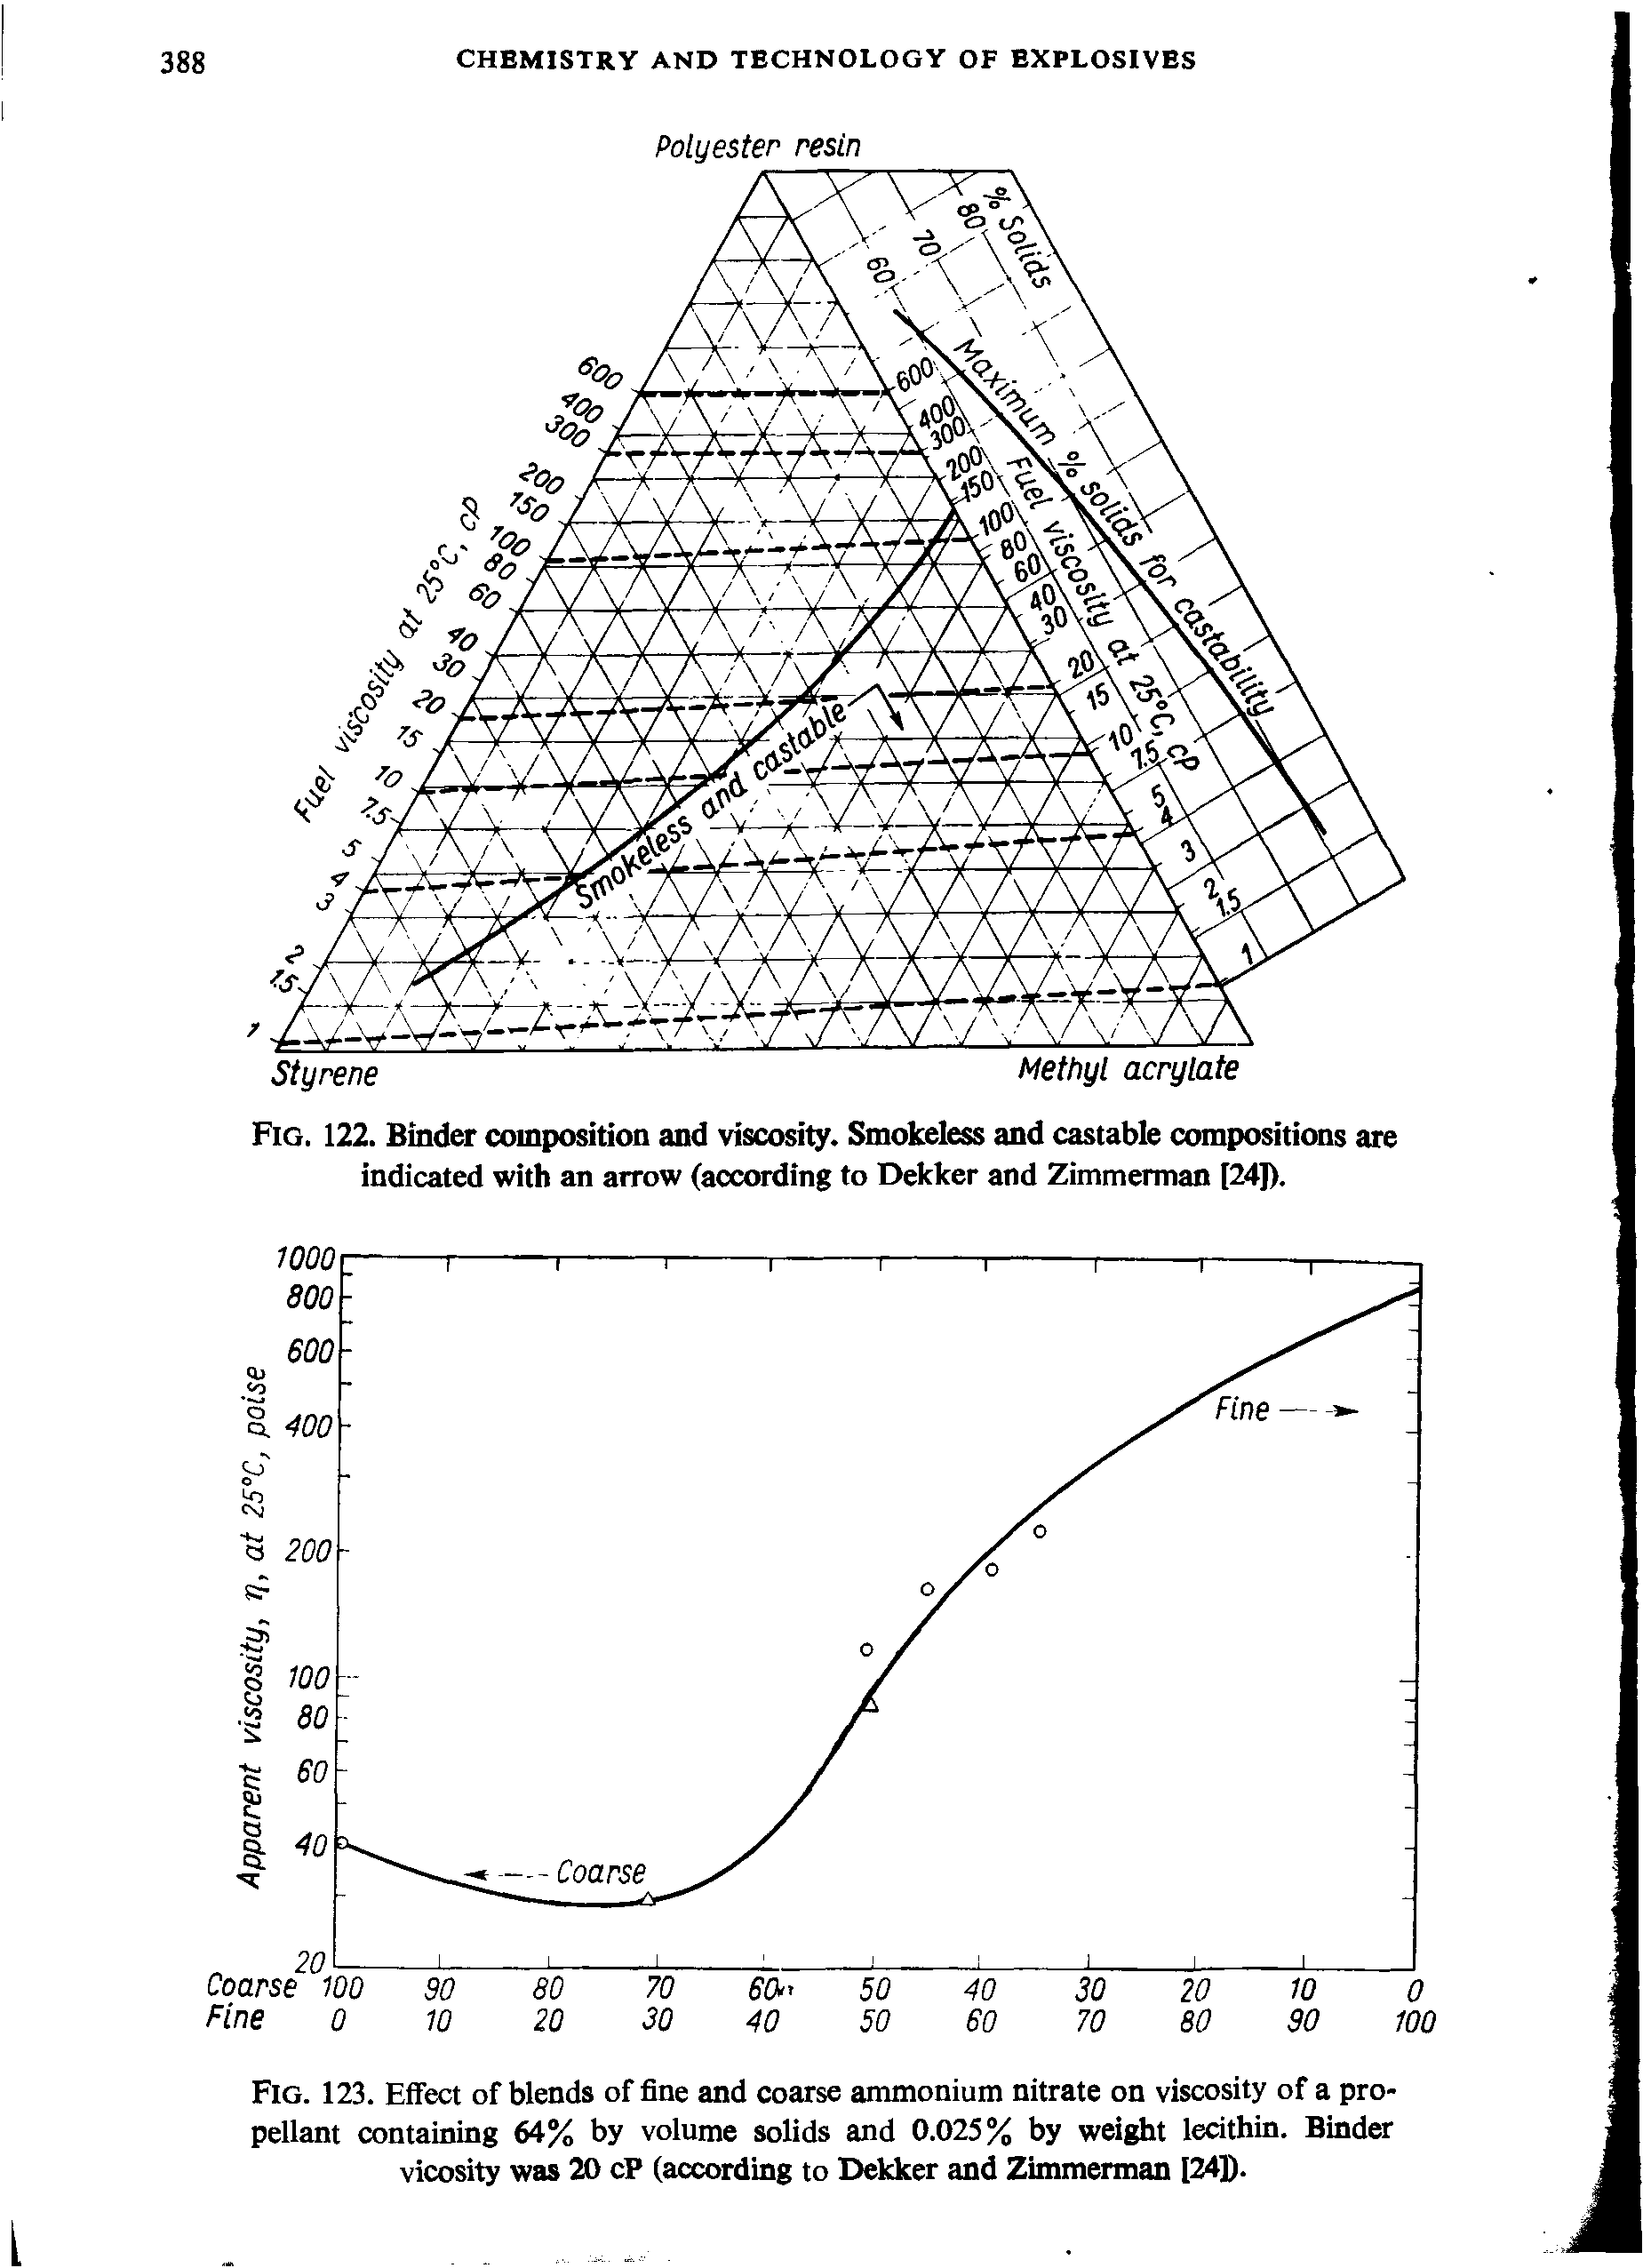 Fig. 123. Effect of blends of fine and coarse ammonium nitrate on viscosity of a propellant containing 64% by volume solids and 0.025% by weight lecithin. Binder vicosity was 20 cF (according to Dekker and Zimmerman [24]).